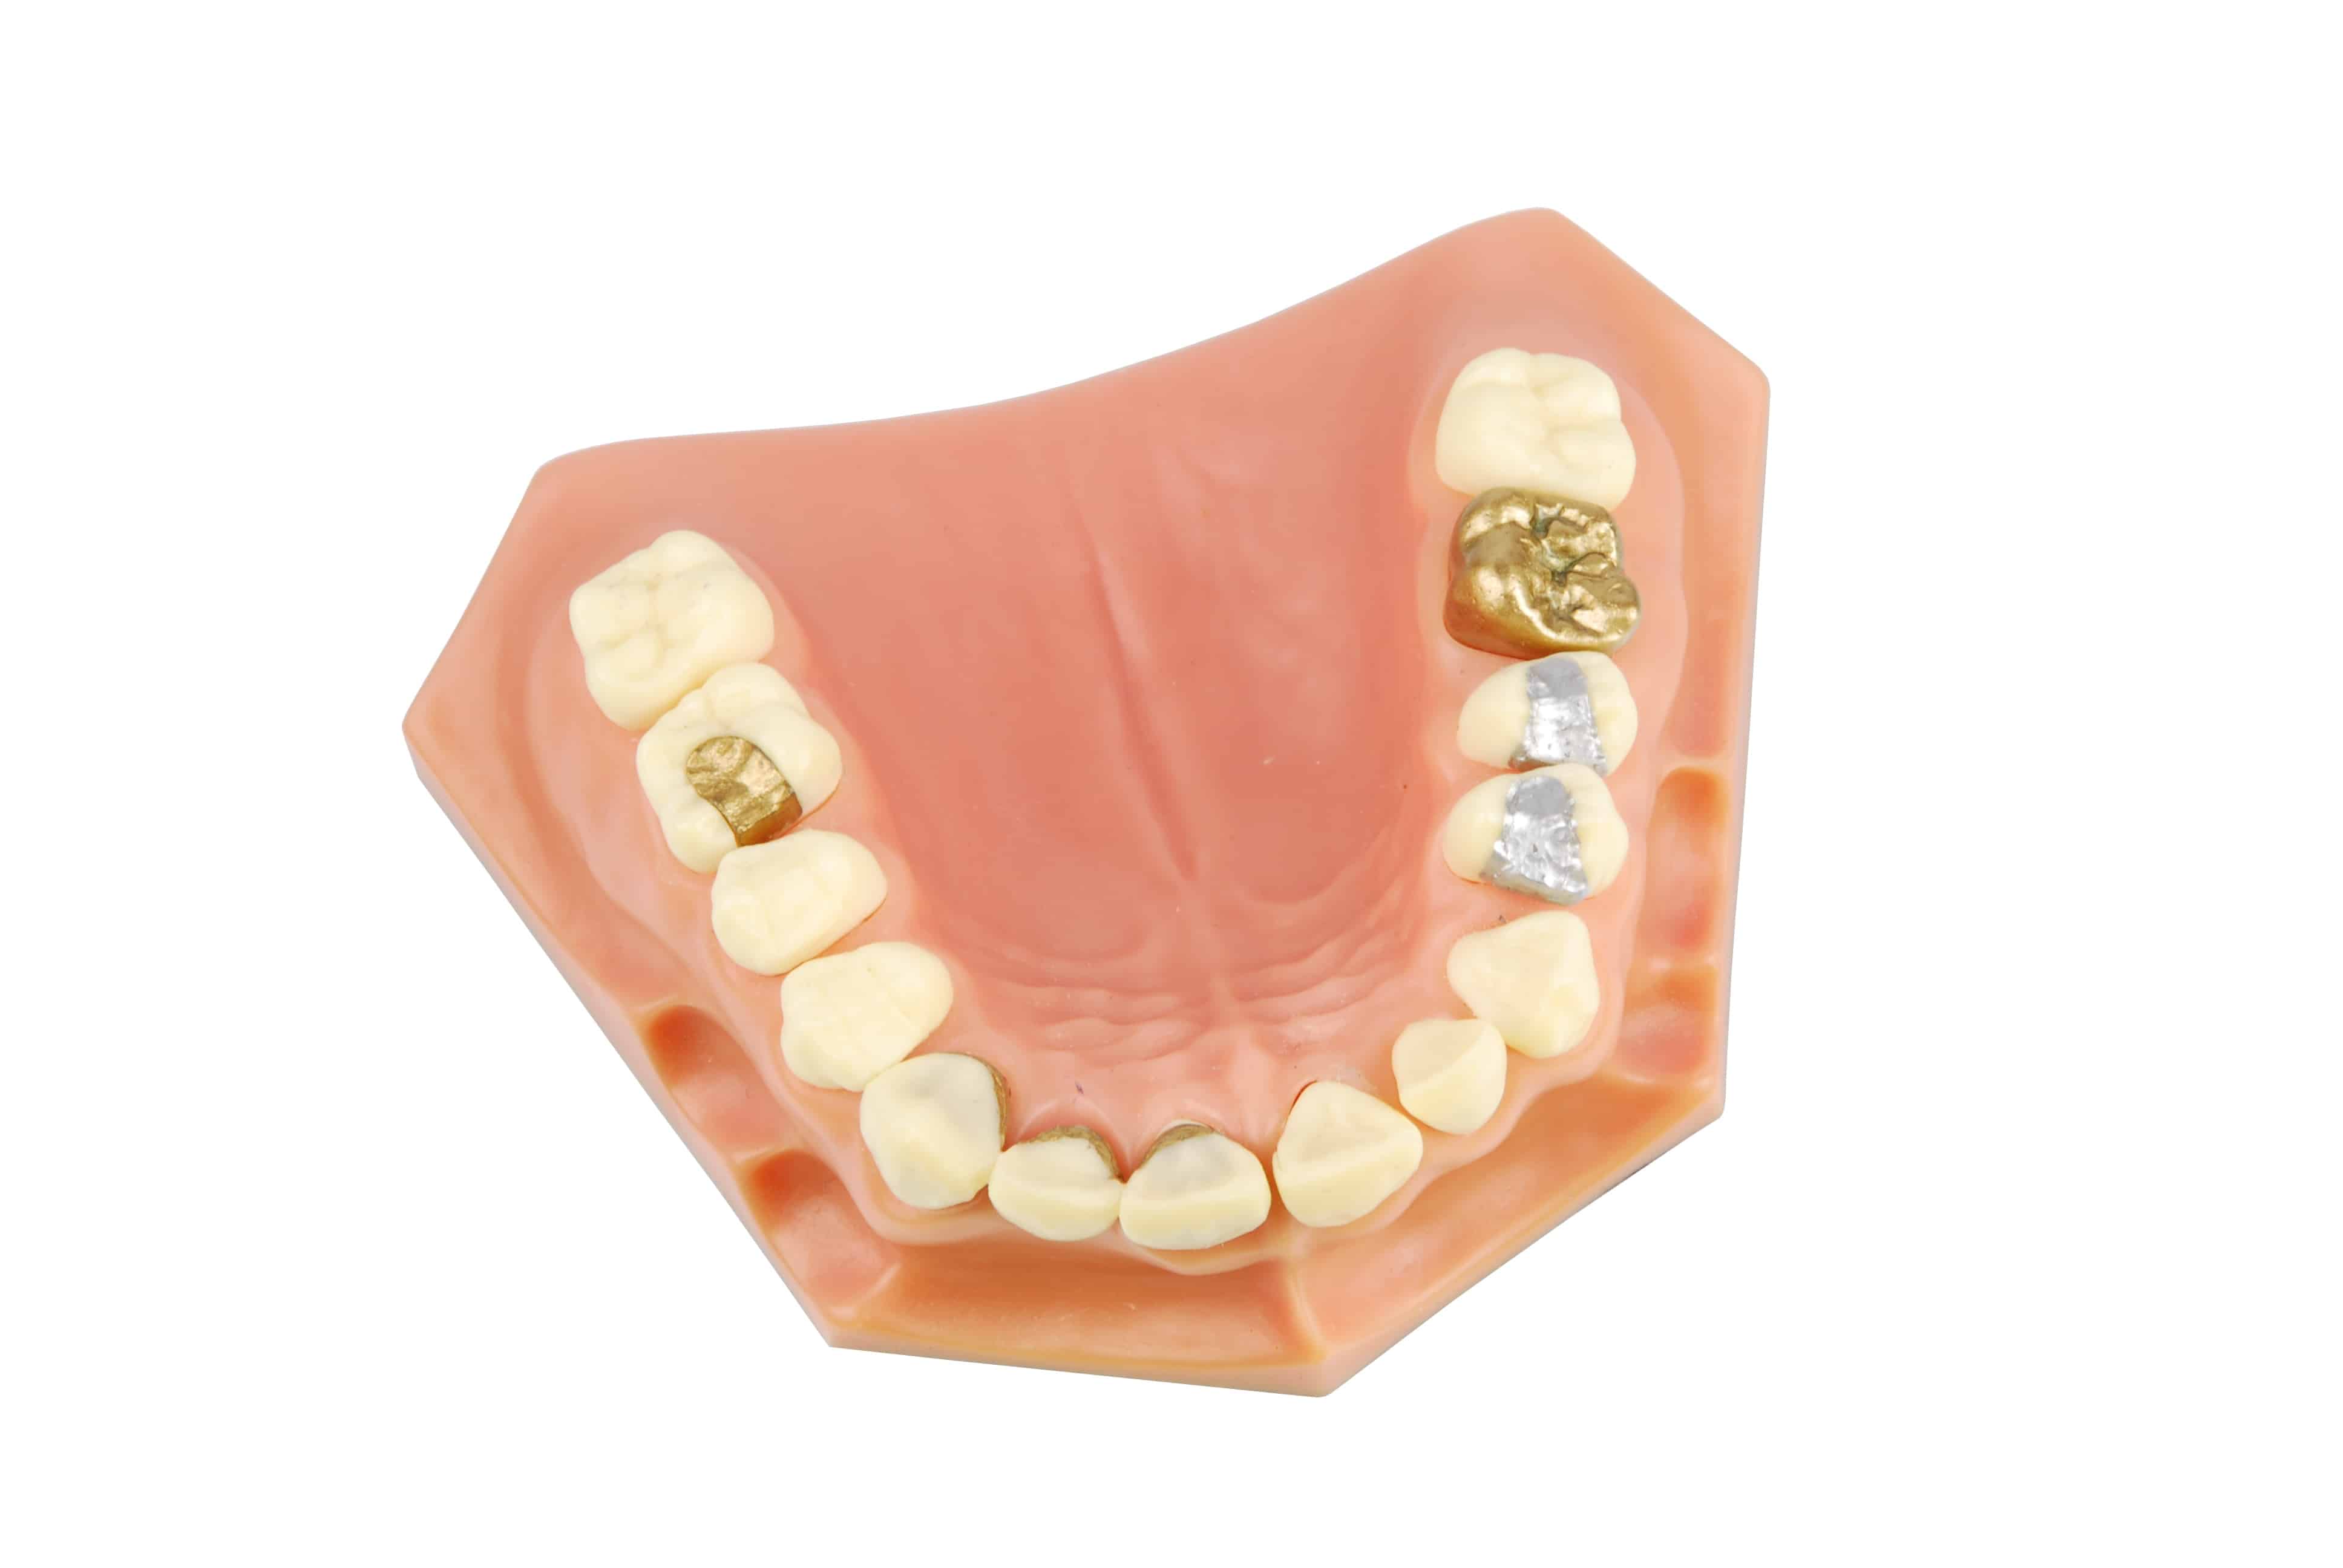 dental model showing different types of treatments (gold crown, porcelain veener, gold inlays, amalgam and composite fillings)